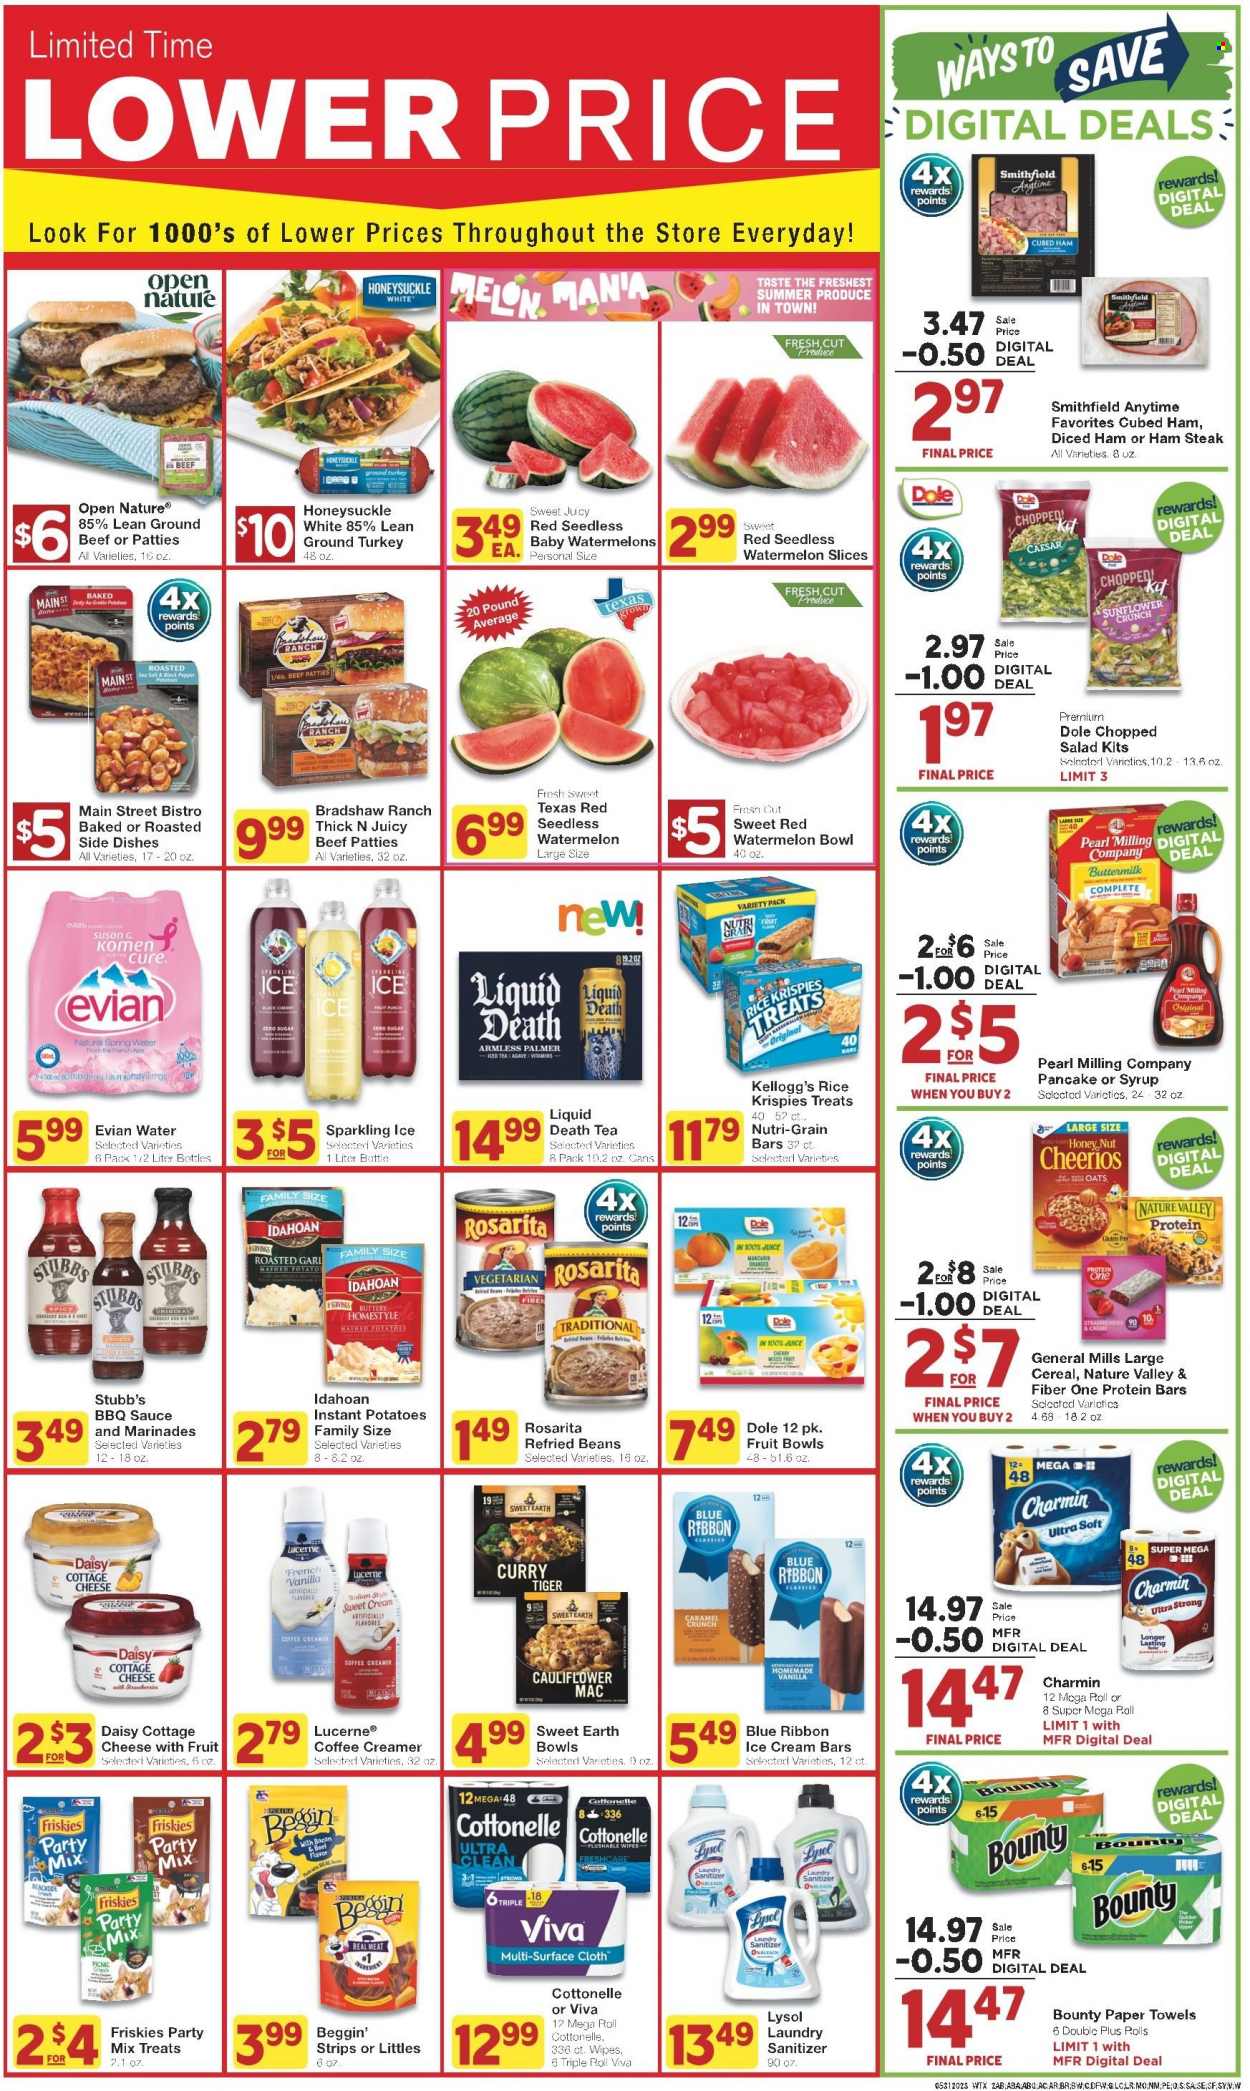 thumbnail - United Supermarkets Flyer - 05/31/2023 - 06/06/2023 - Sales products - cauliflower, salad, Dole, chopped salad, mandarines, watermelon, cherries, oranges, fruit cup, ground turkey, turkey, beef meat, ground beef, steak, mashed potatoes, sauce, pancakes, cottage cheese, cheese, buttermilk, creamer, ice cream, ice cream bars, strips, marshmallows, Bounty, Kellogg's, General Mills, oats, refried beans, cereals, Cheerios, protein bar, Rice Krispies, Nature Valley, Fiber One, Nutri-Grain, BBQ sauce, juice, Fanta, ice tea, spring water, flavored water, Evian, water, wipes, Cottonelle, kitchen towels, paper towels, Charmin, bleach, Lysol, laundry detergent, Purina, Beggin', Friskies, melons. Page 2.